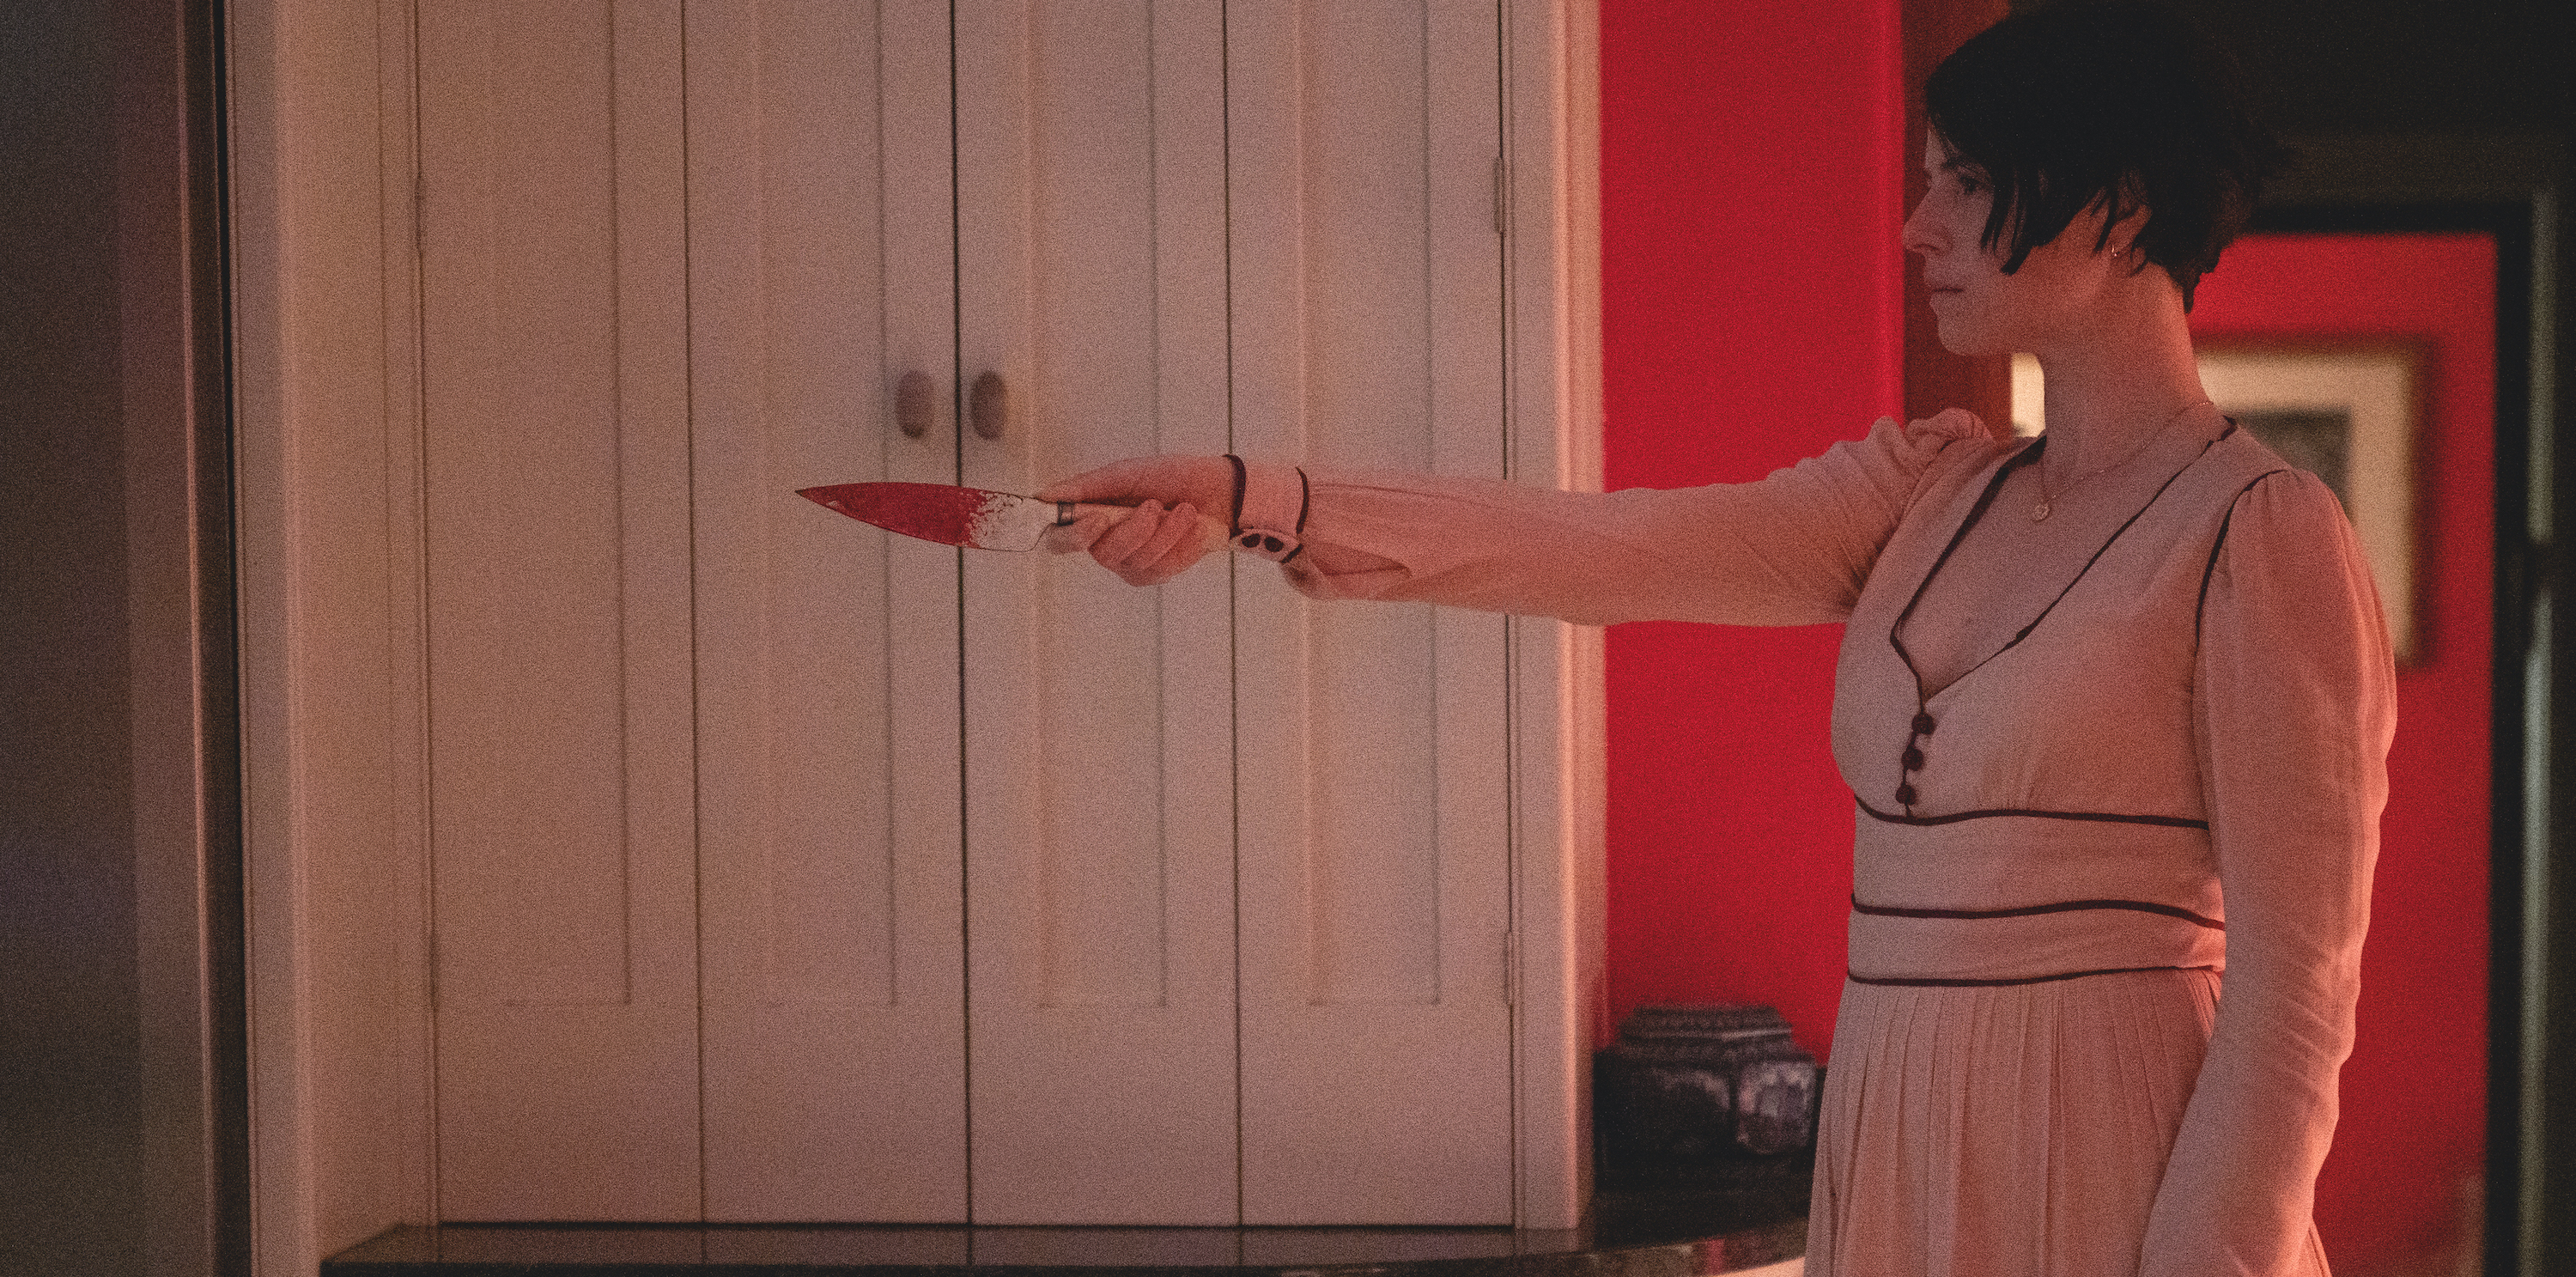 Jessie Buckley in a long pink dress, holding up a bloody knife in Men